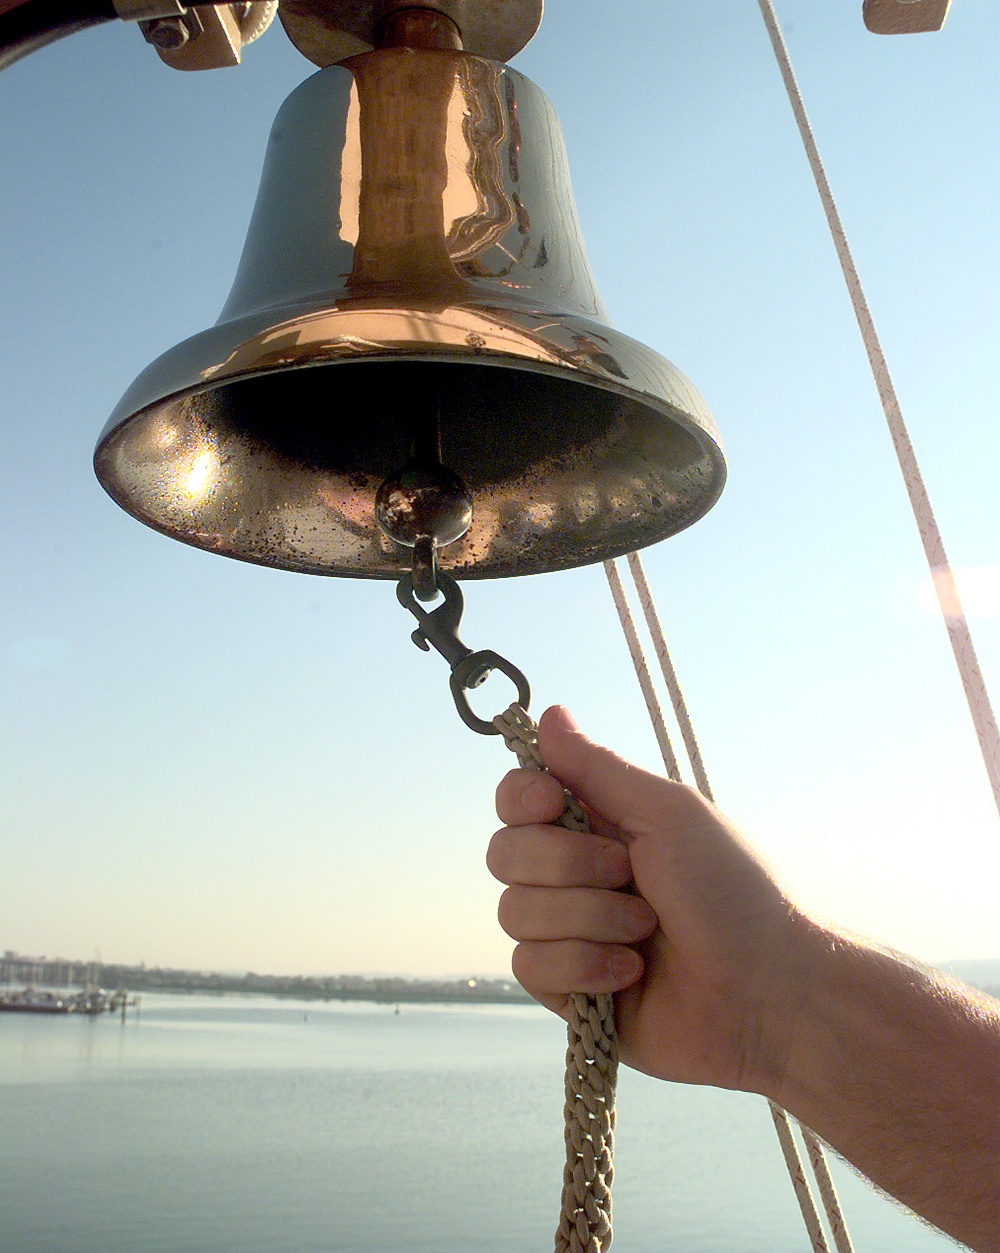 DVIDS - Images - Ringing the ship's bell